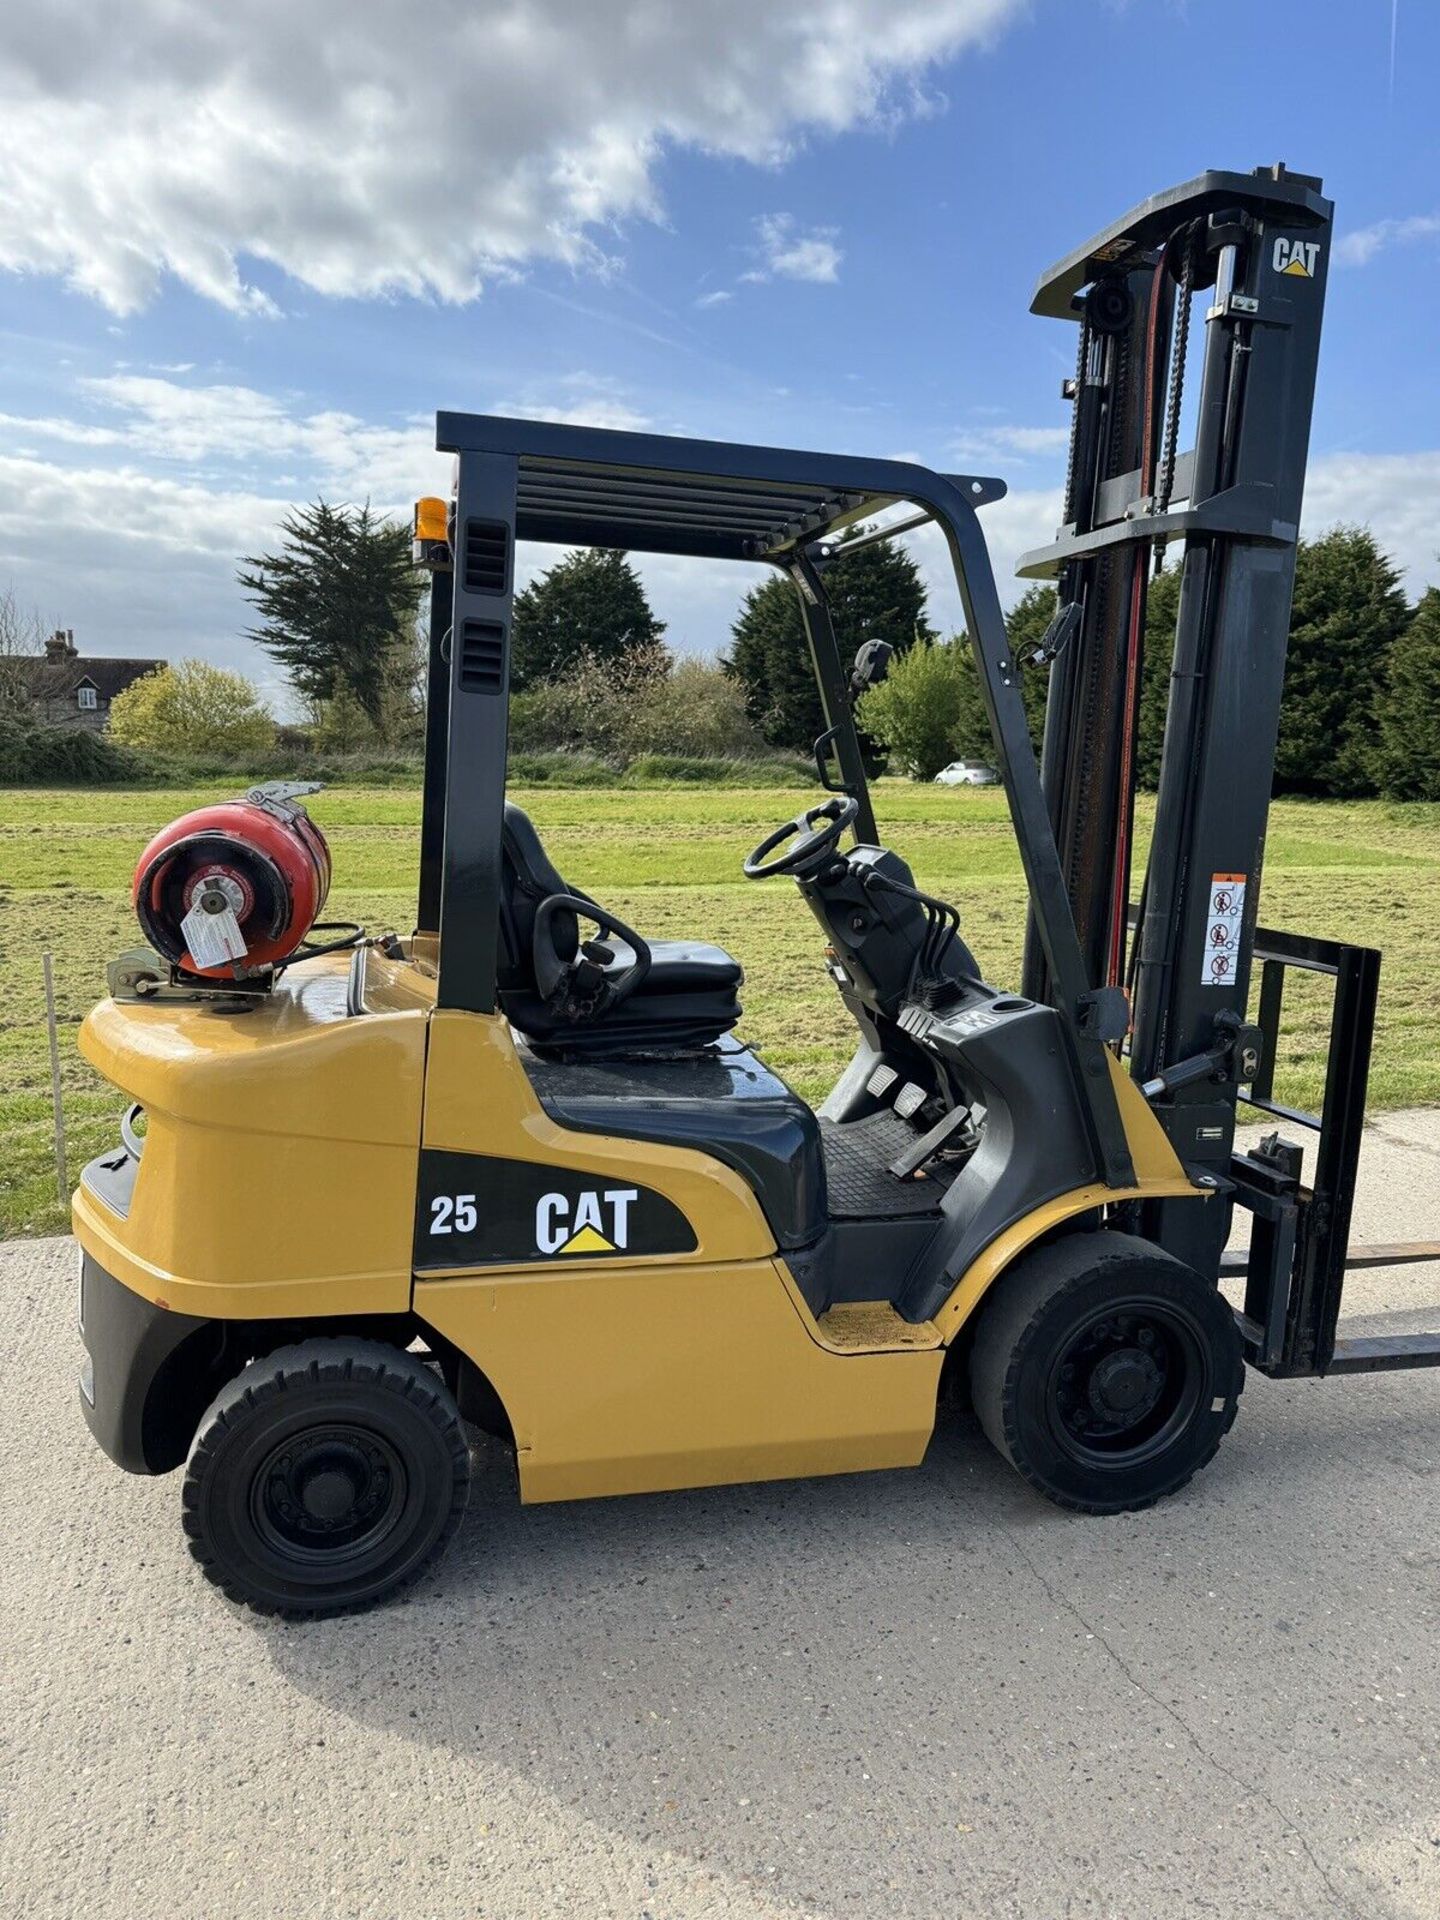 2015, CATERPILLAR - 2.5 Tonne Gas Forklift With Side Shift - Image 2 of 6